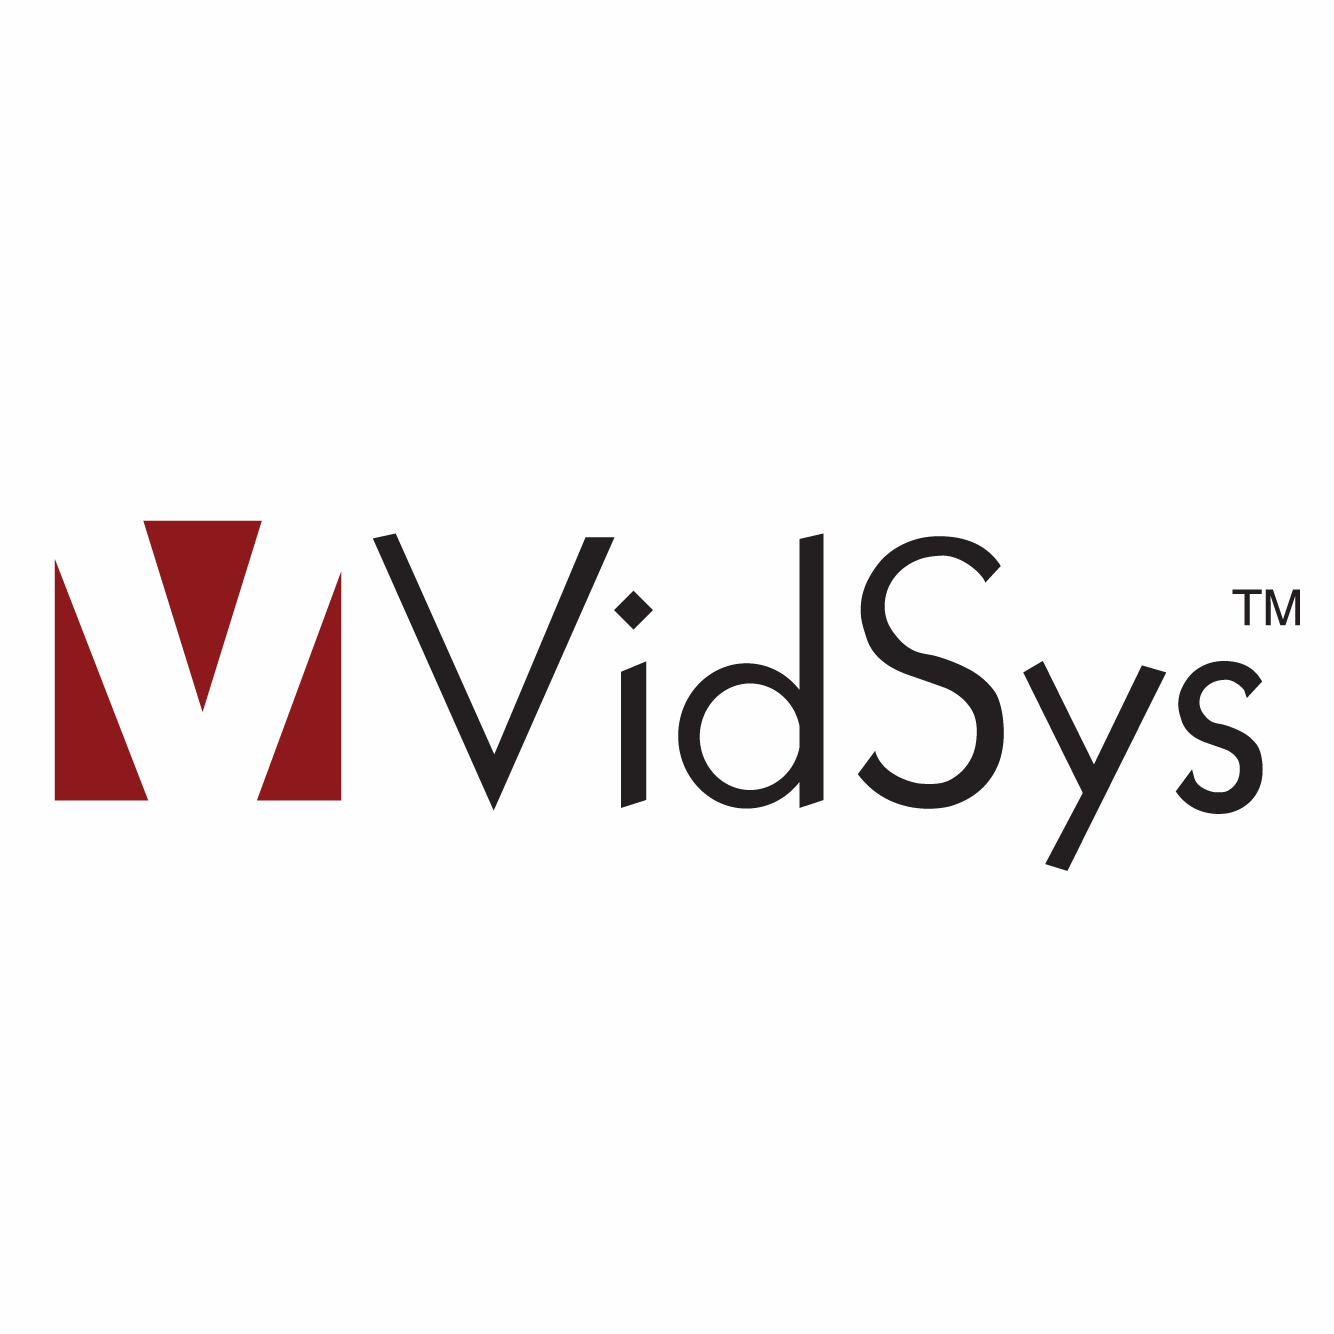 http://securetech.ae/wp-content/uploads/2019/02/14.VIDSYS.png